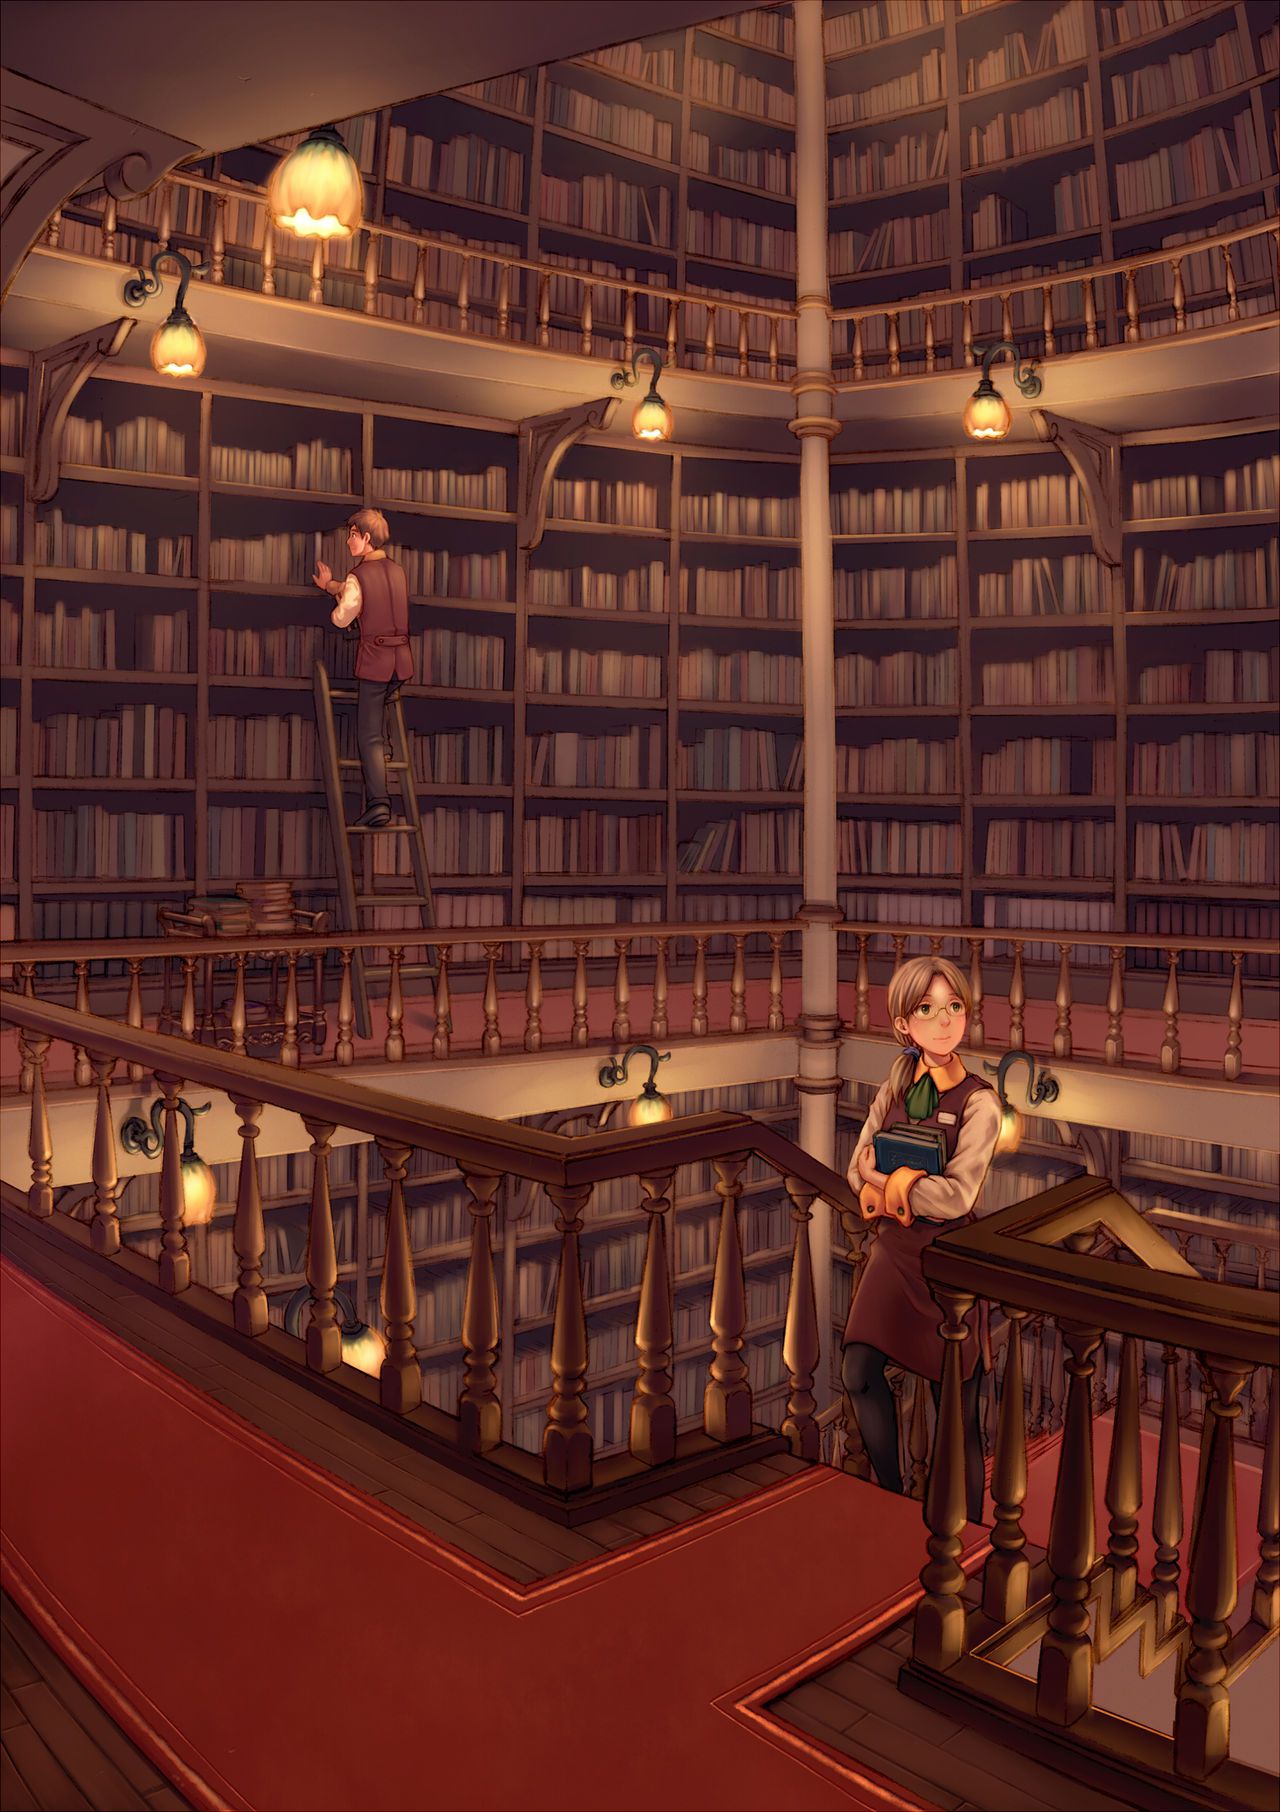 In The Library 3